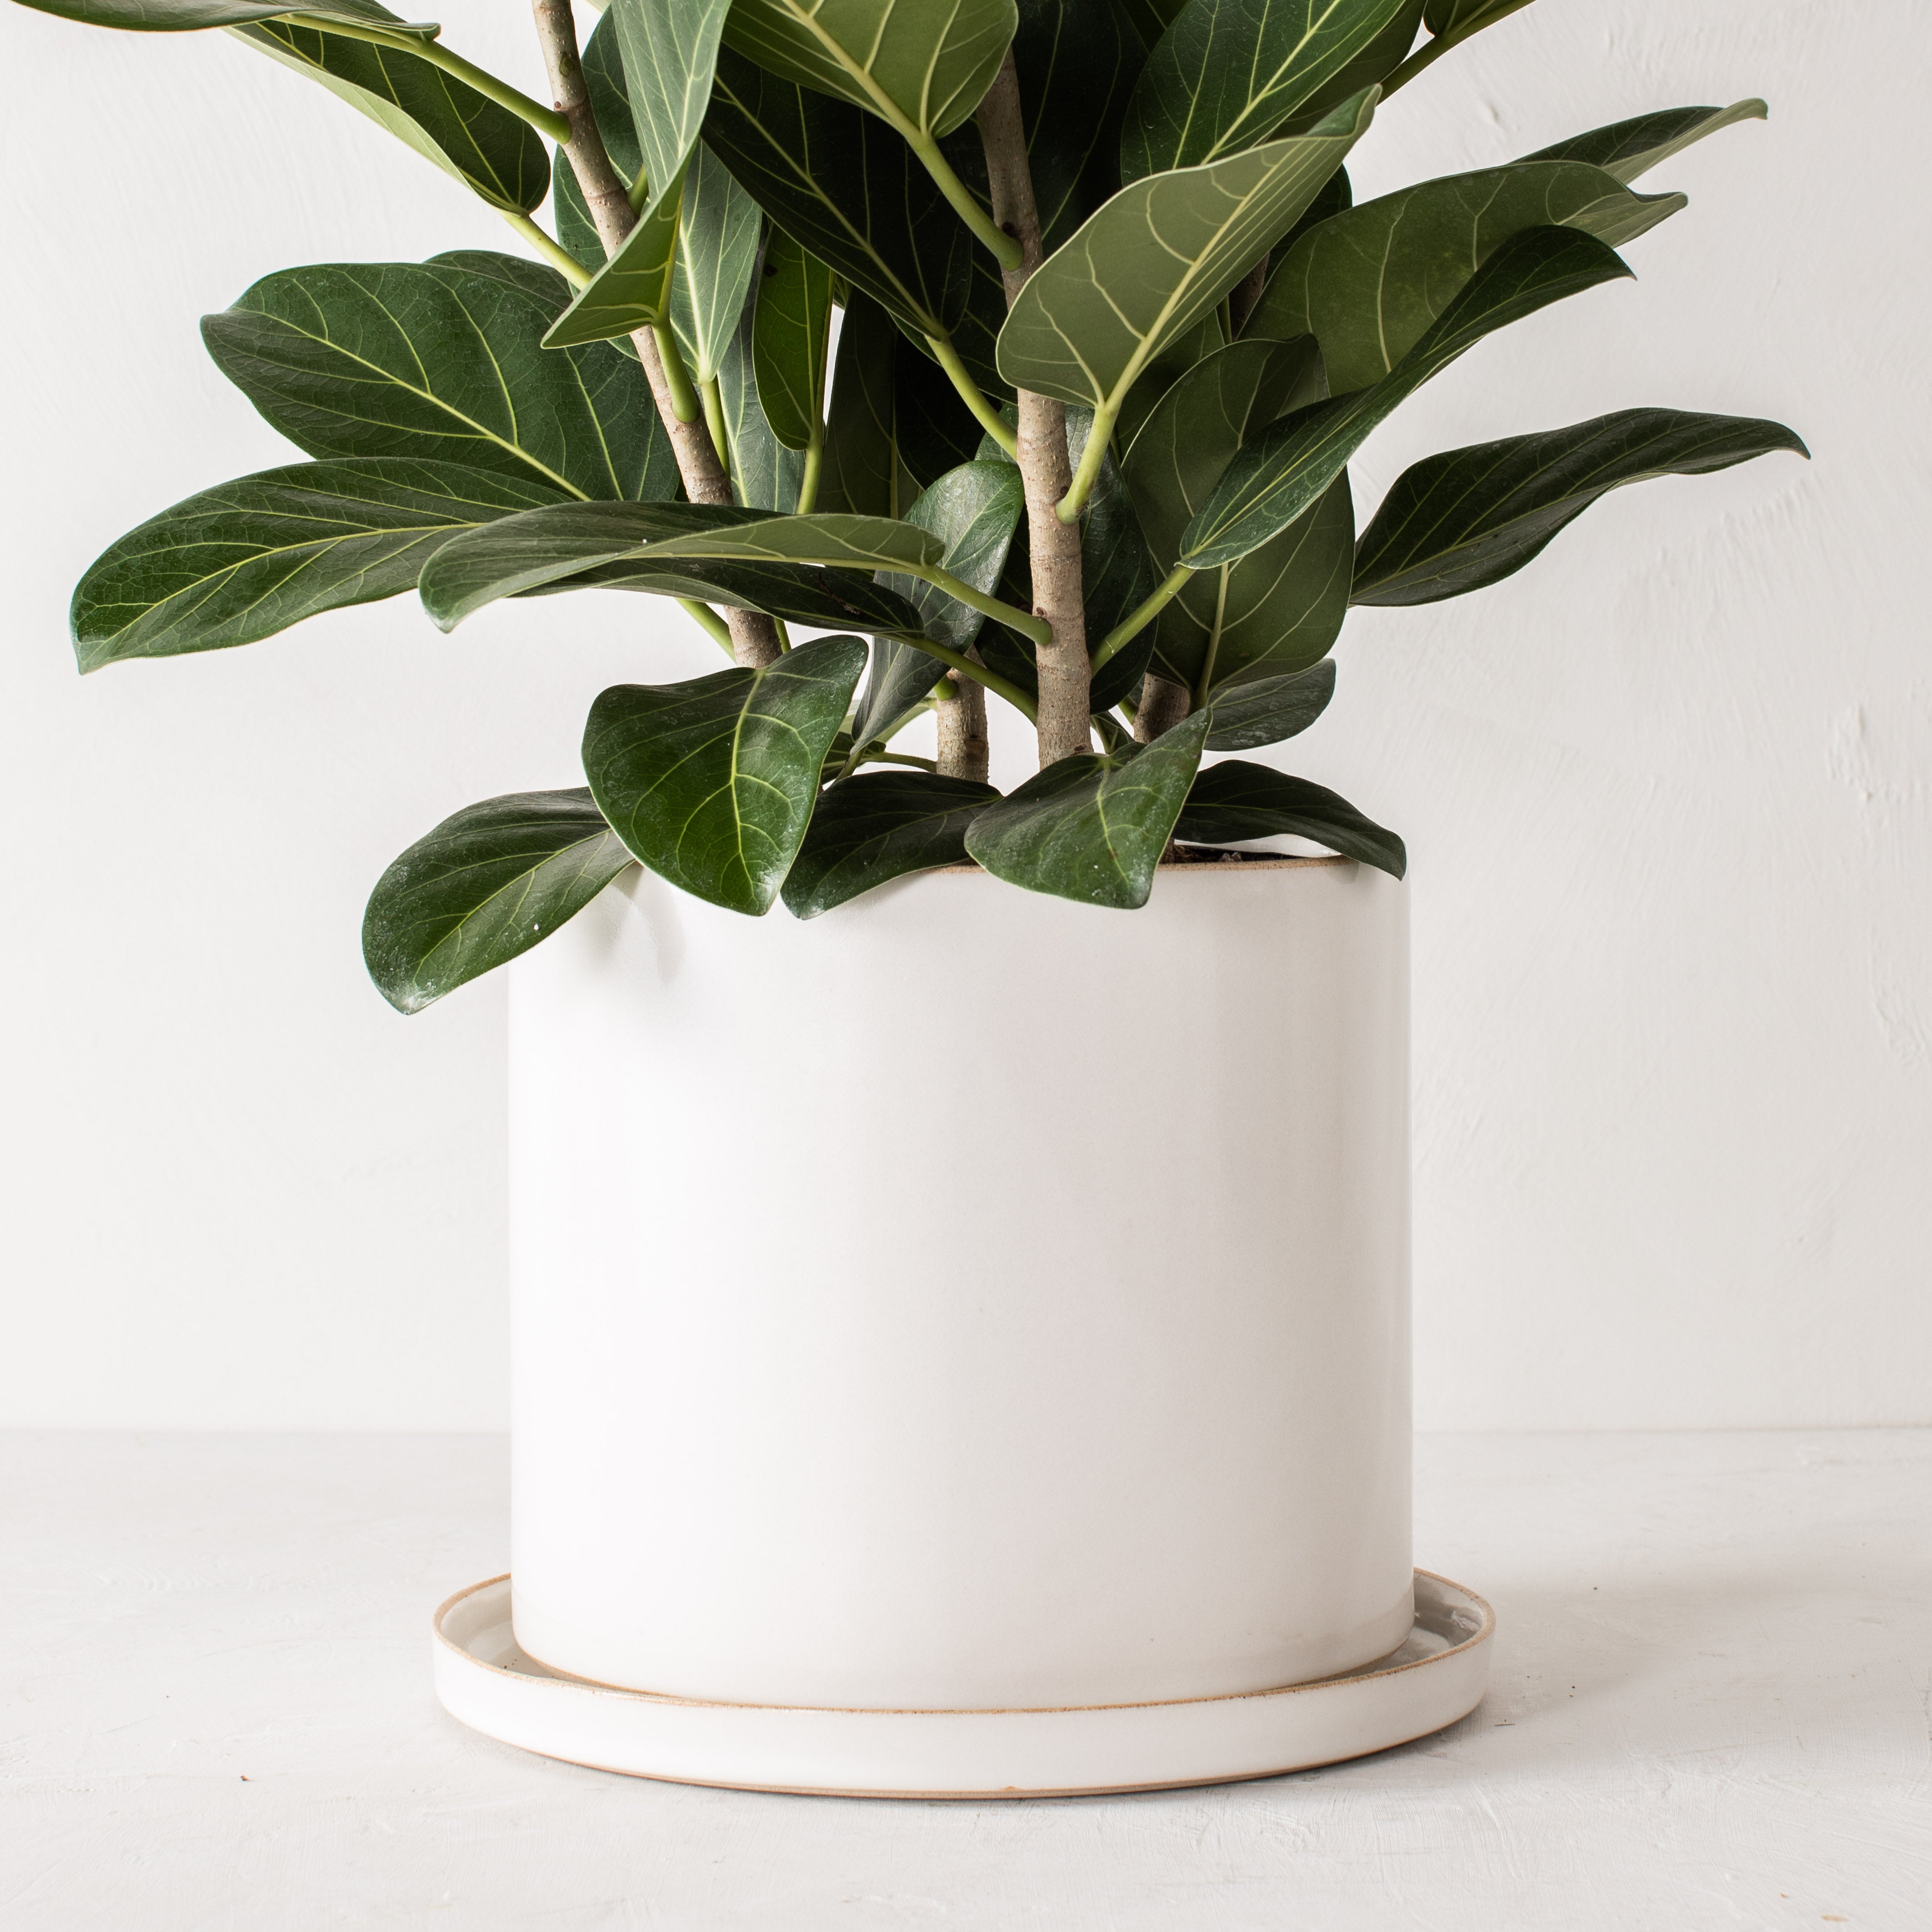 10 inch white ceramic planter with a bottom drainage dish. Staged on a white plaster textured tabletop against a plaster textured white wall. Large tall fiddle leaf plant inside. Designed and sold by Convivial Production, Kansas City Ceramics.